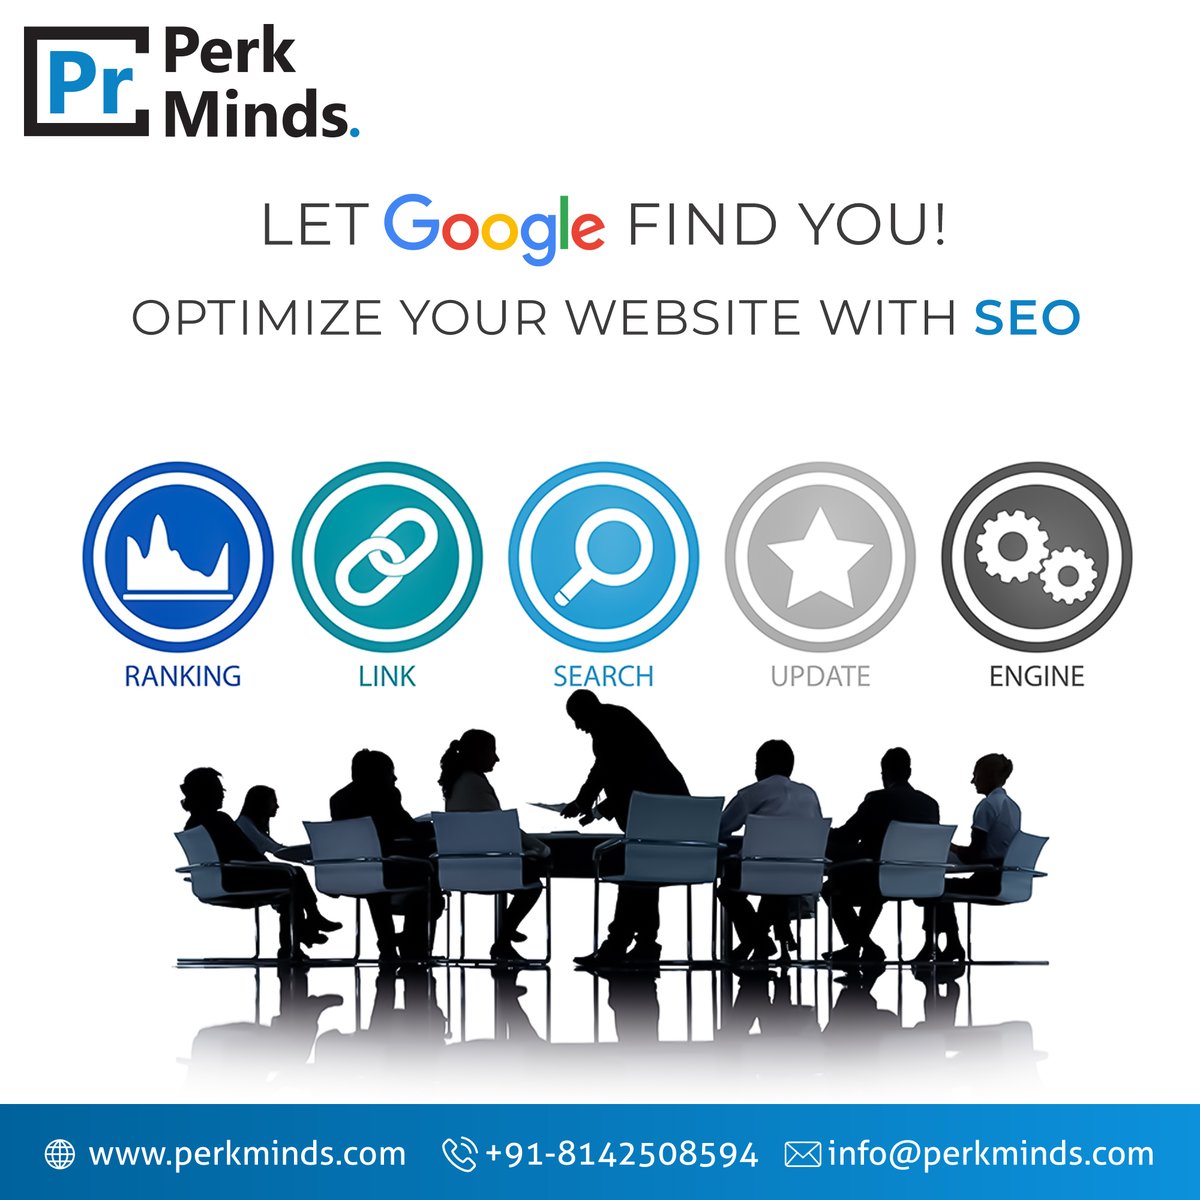 “SEO is not just about keywords. It’s about understanding user intent and creating content that meets their needs.”
👋 Follow for More: @perkminds
🌐 Website: perkminds.com
☎️ Call Us: 095820 26462

#perkminds #SEOoptimization #WebPortalSuccess #DigitalVisibility